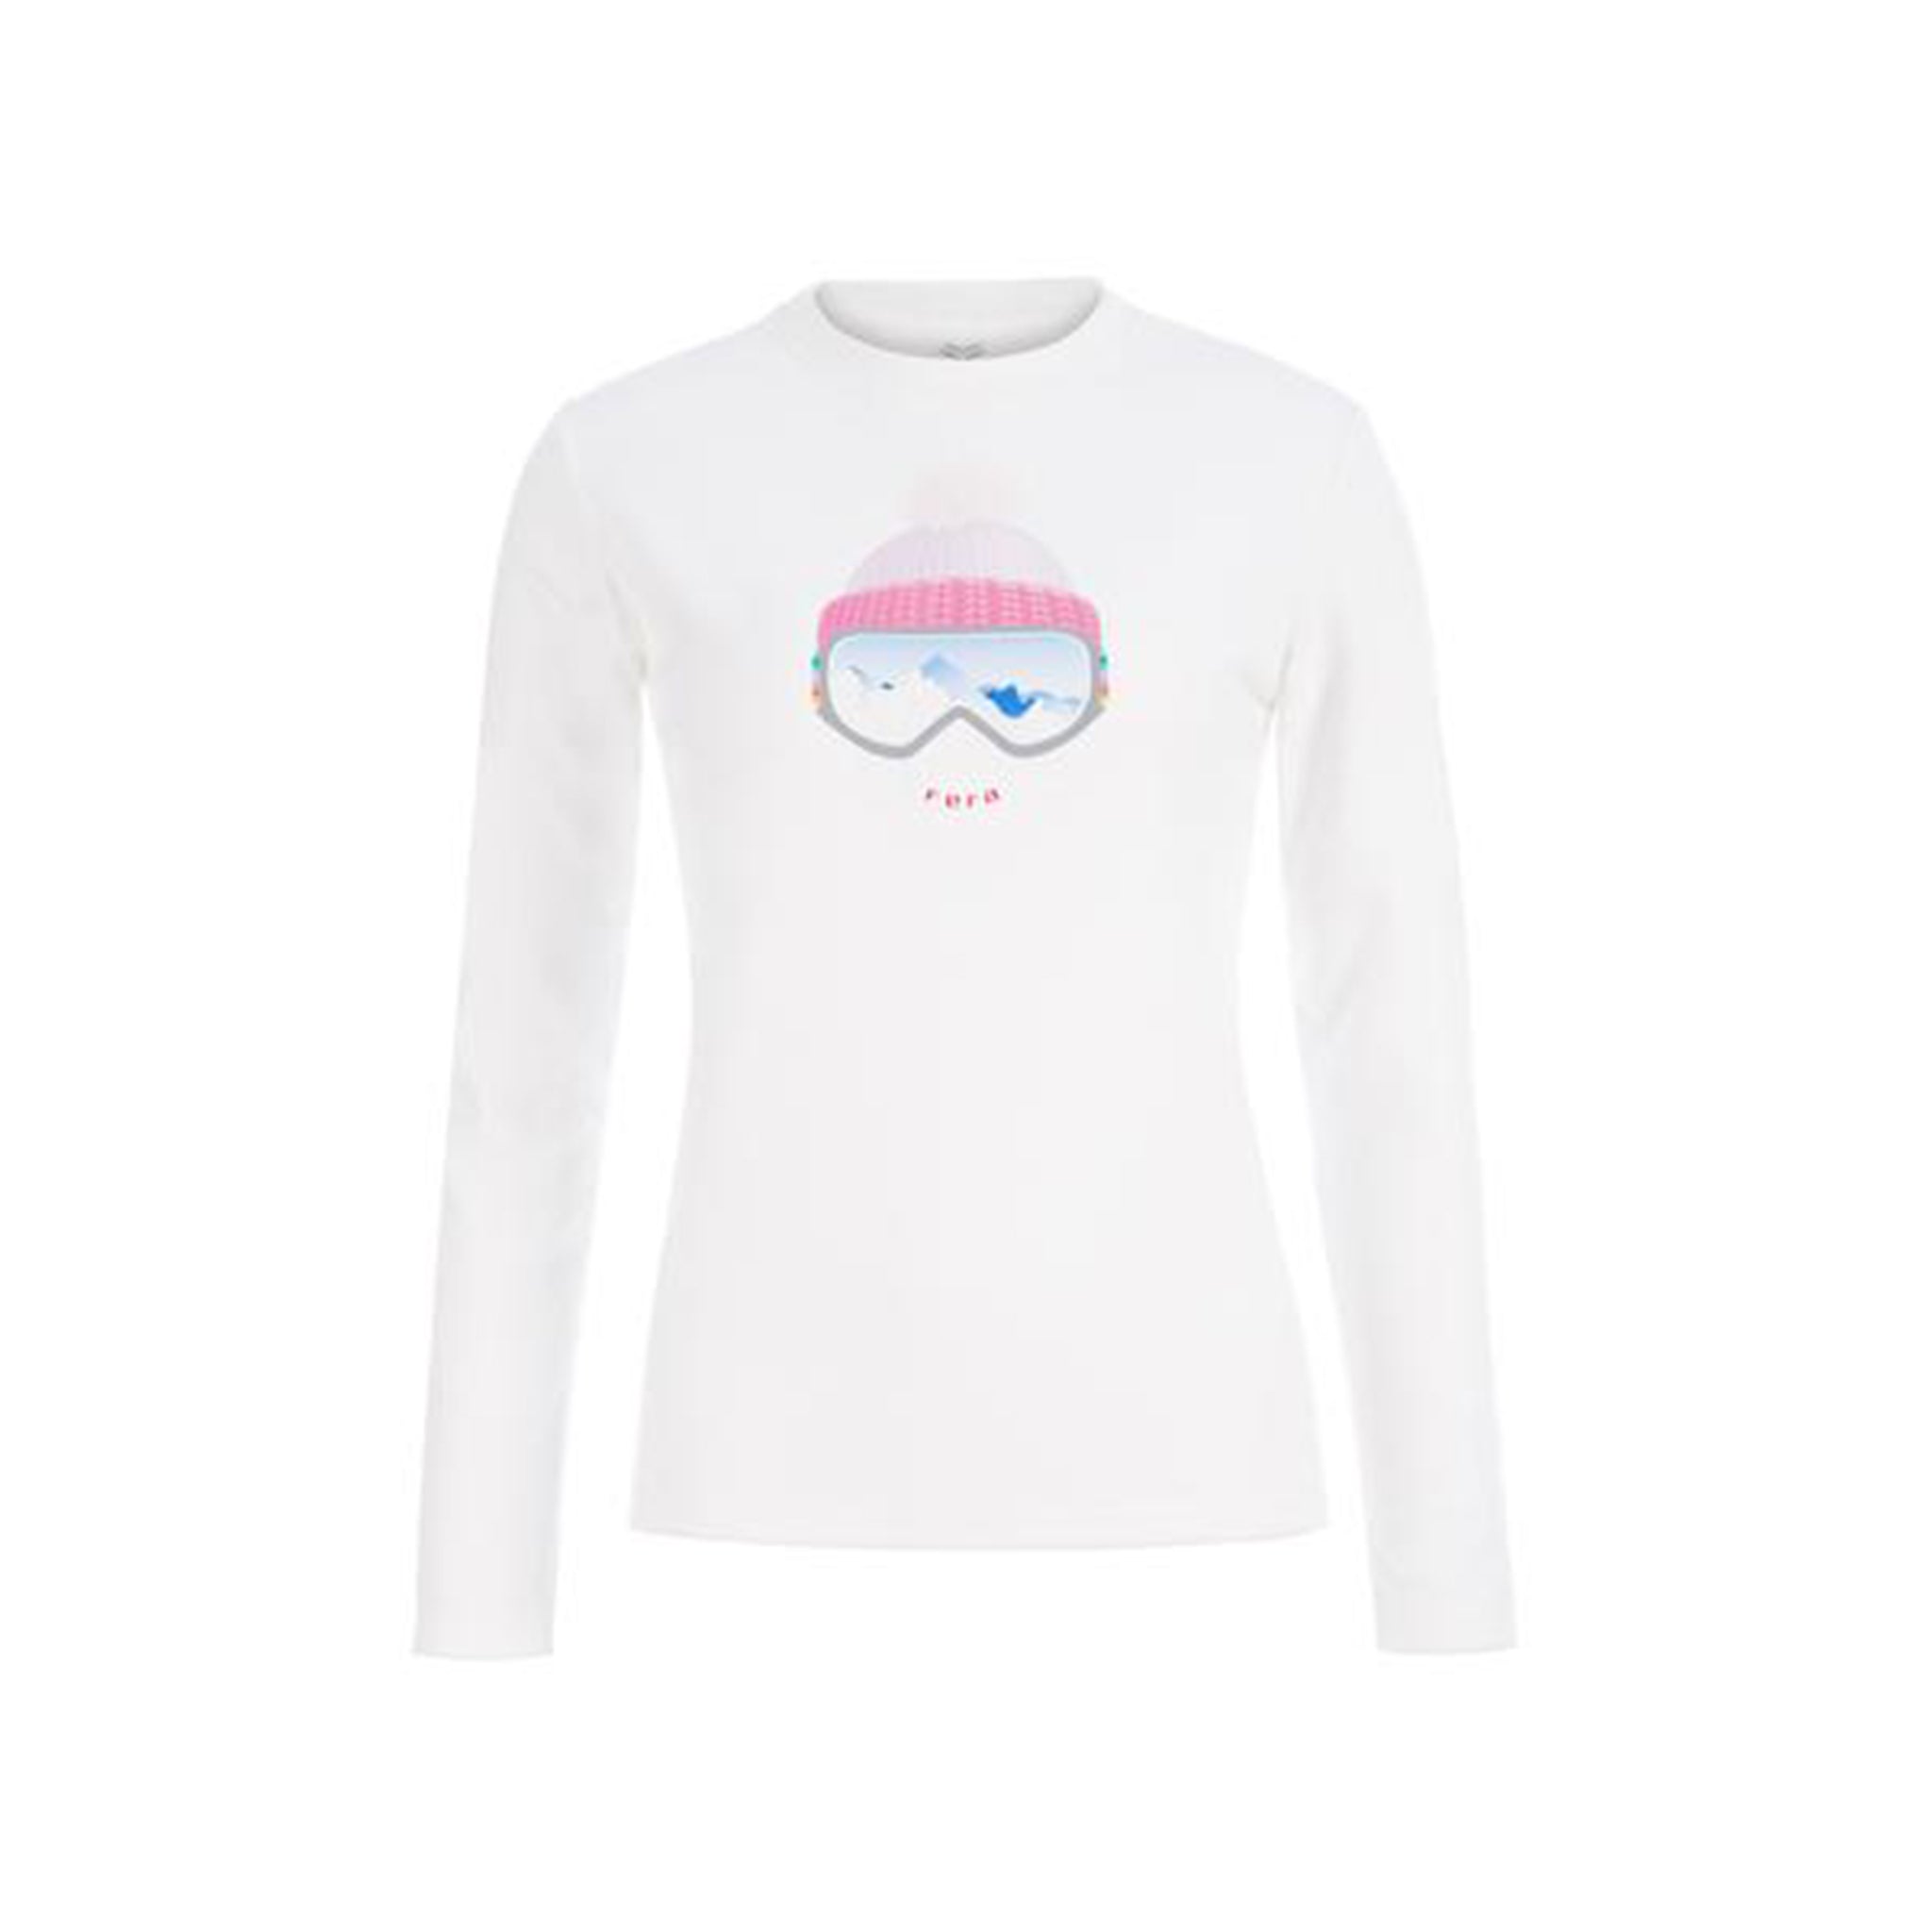 Goggle Tee in White